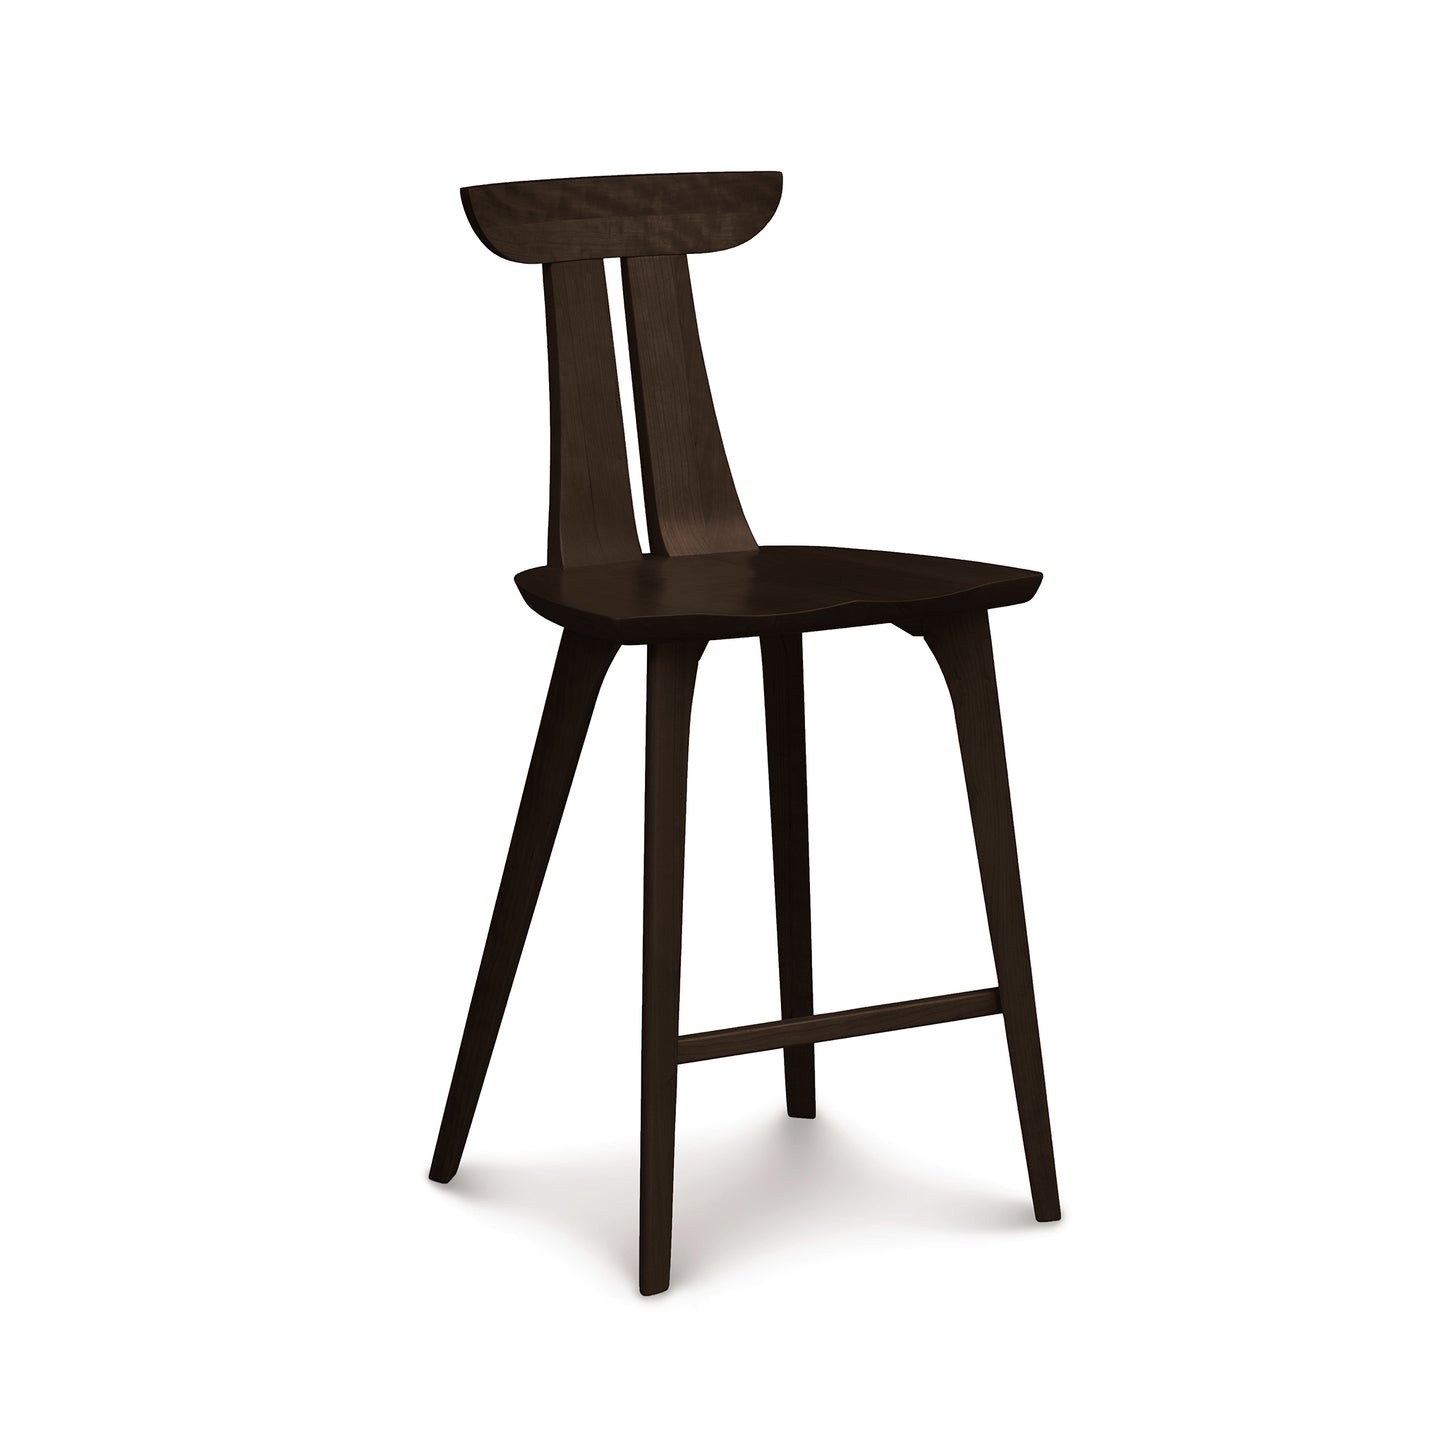 A Copeland Furniture Estelle Counter Stool with a dark finish isolated on a white background.